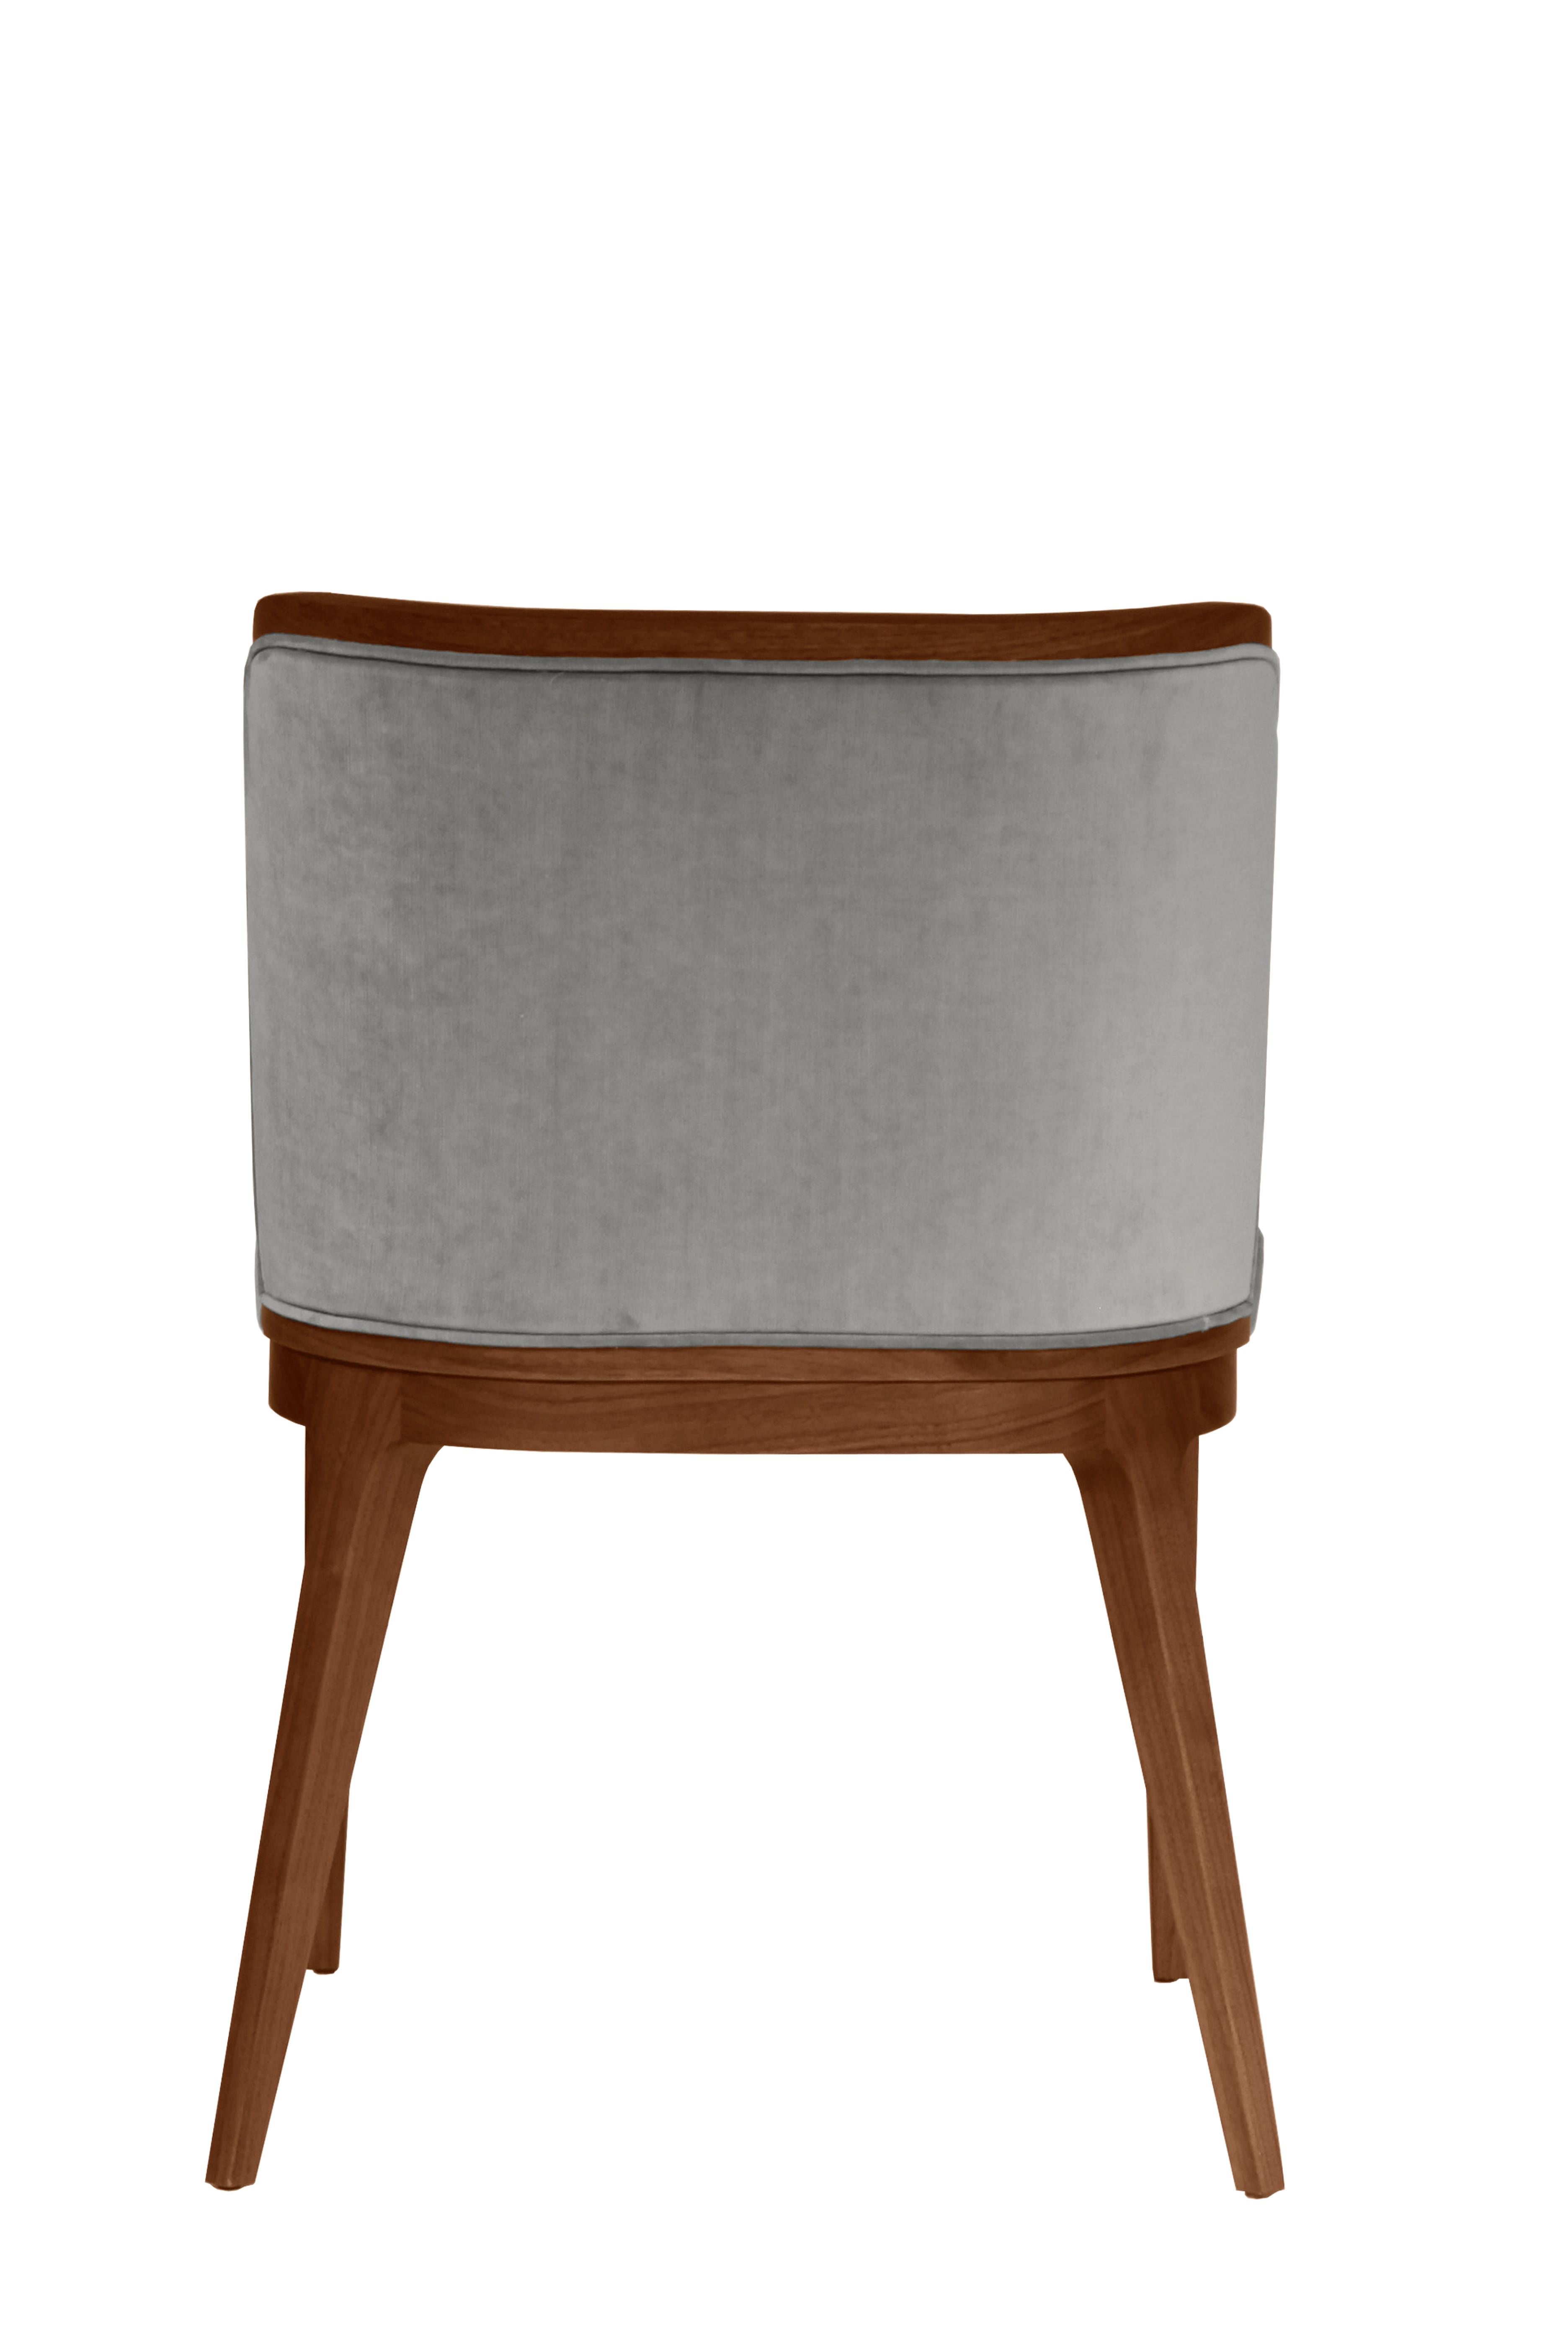 low seating chair with a soft rounded back